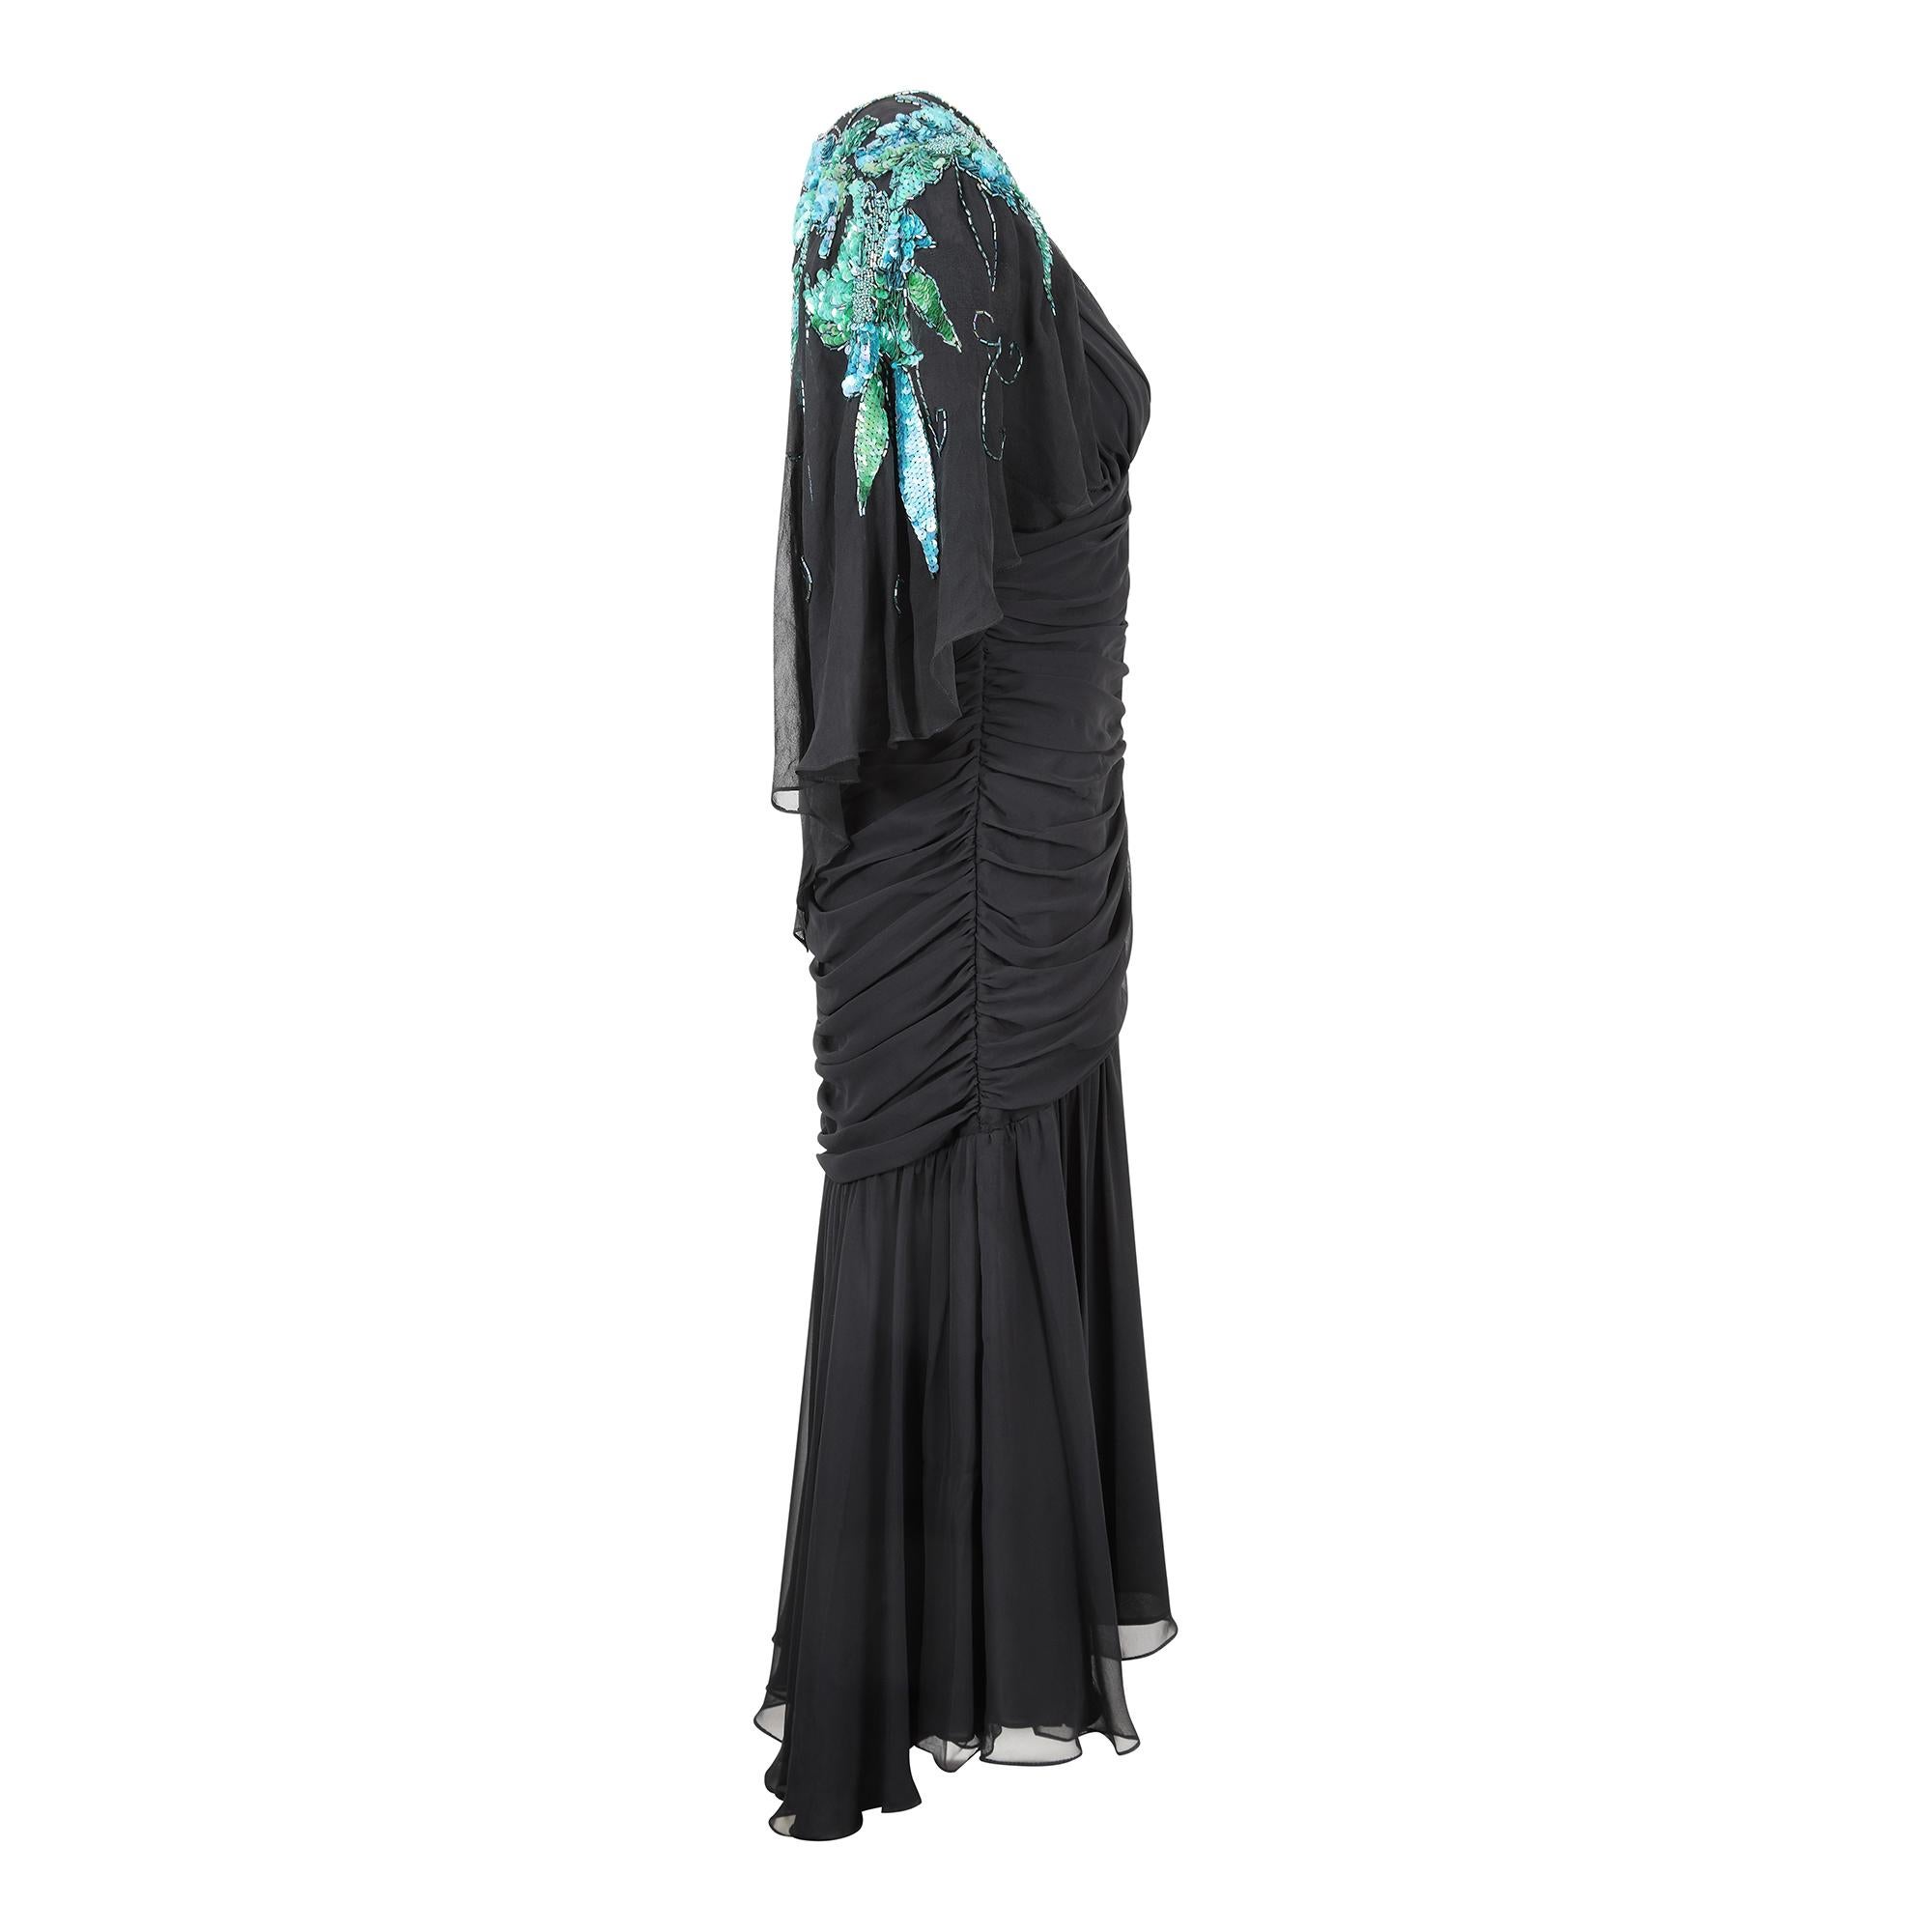 This is a super sexy 1980s Casadei black stretch chiffon dress with front ruching and a turquoise sequinned attached capelet. Typical of its era, this dress has such great design features especially the flattering draping and ruching as well as the